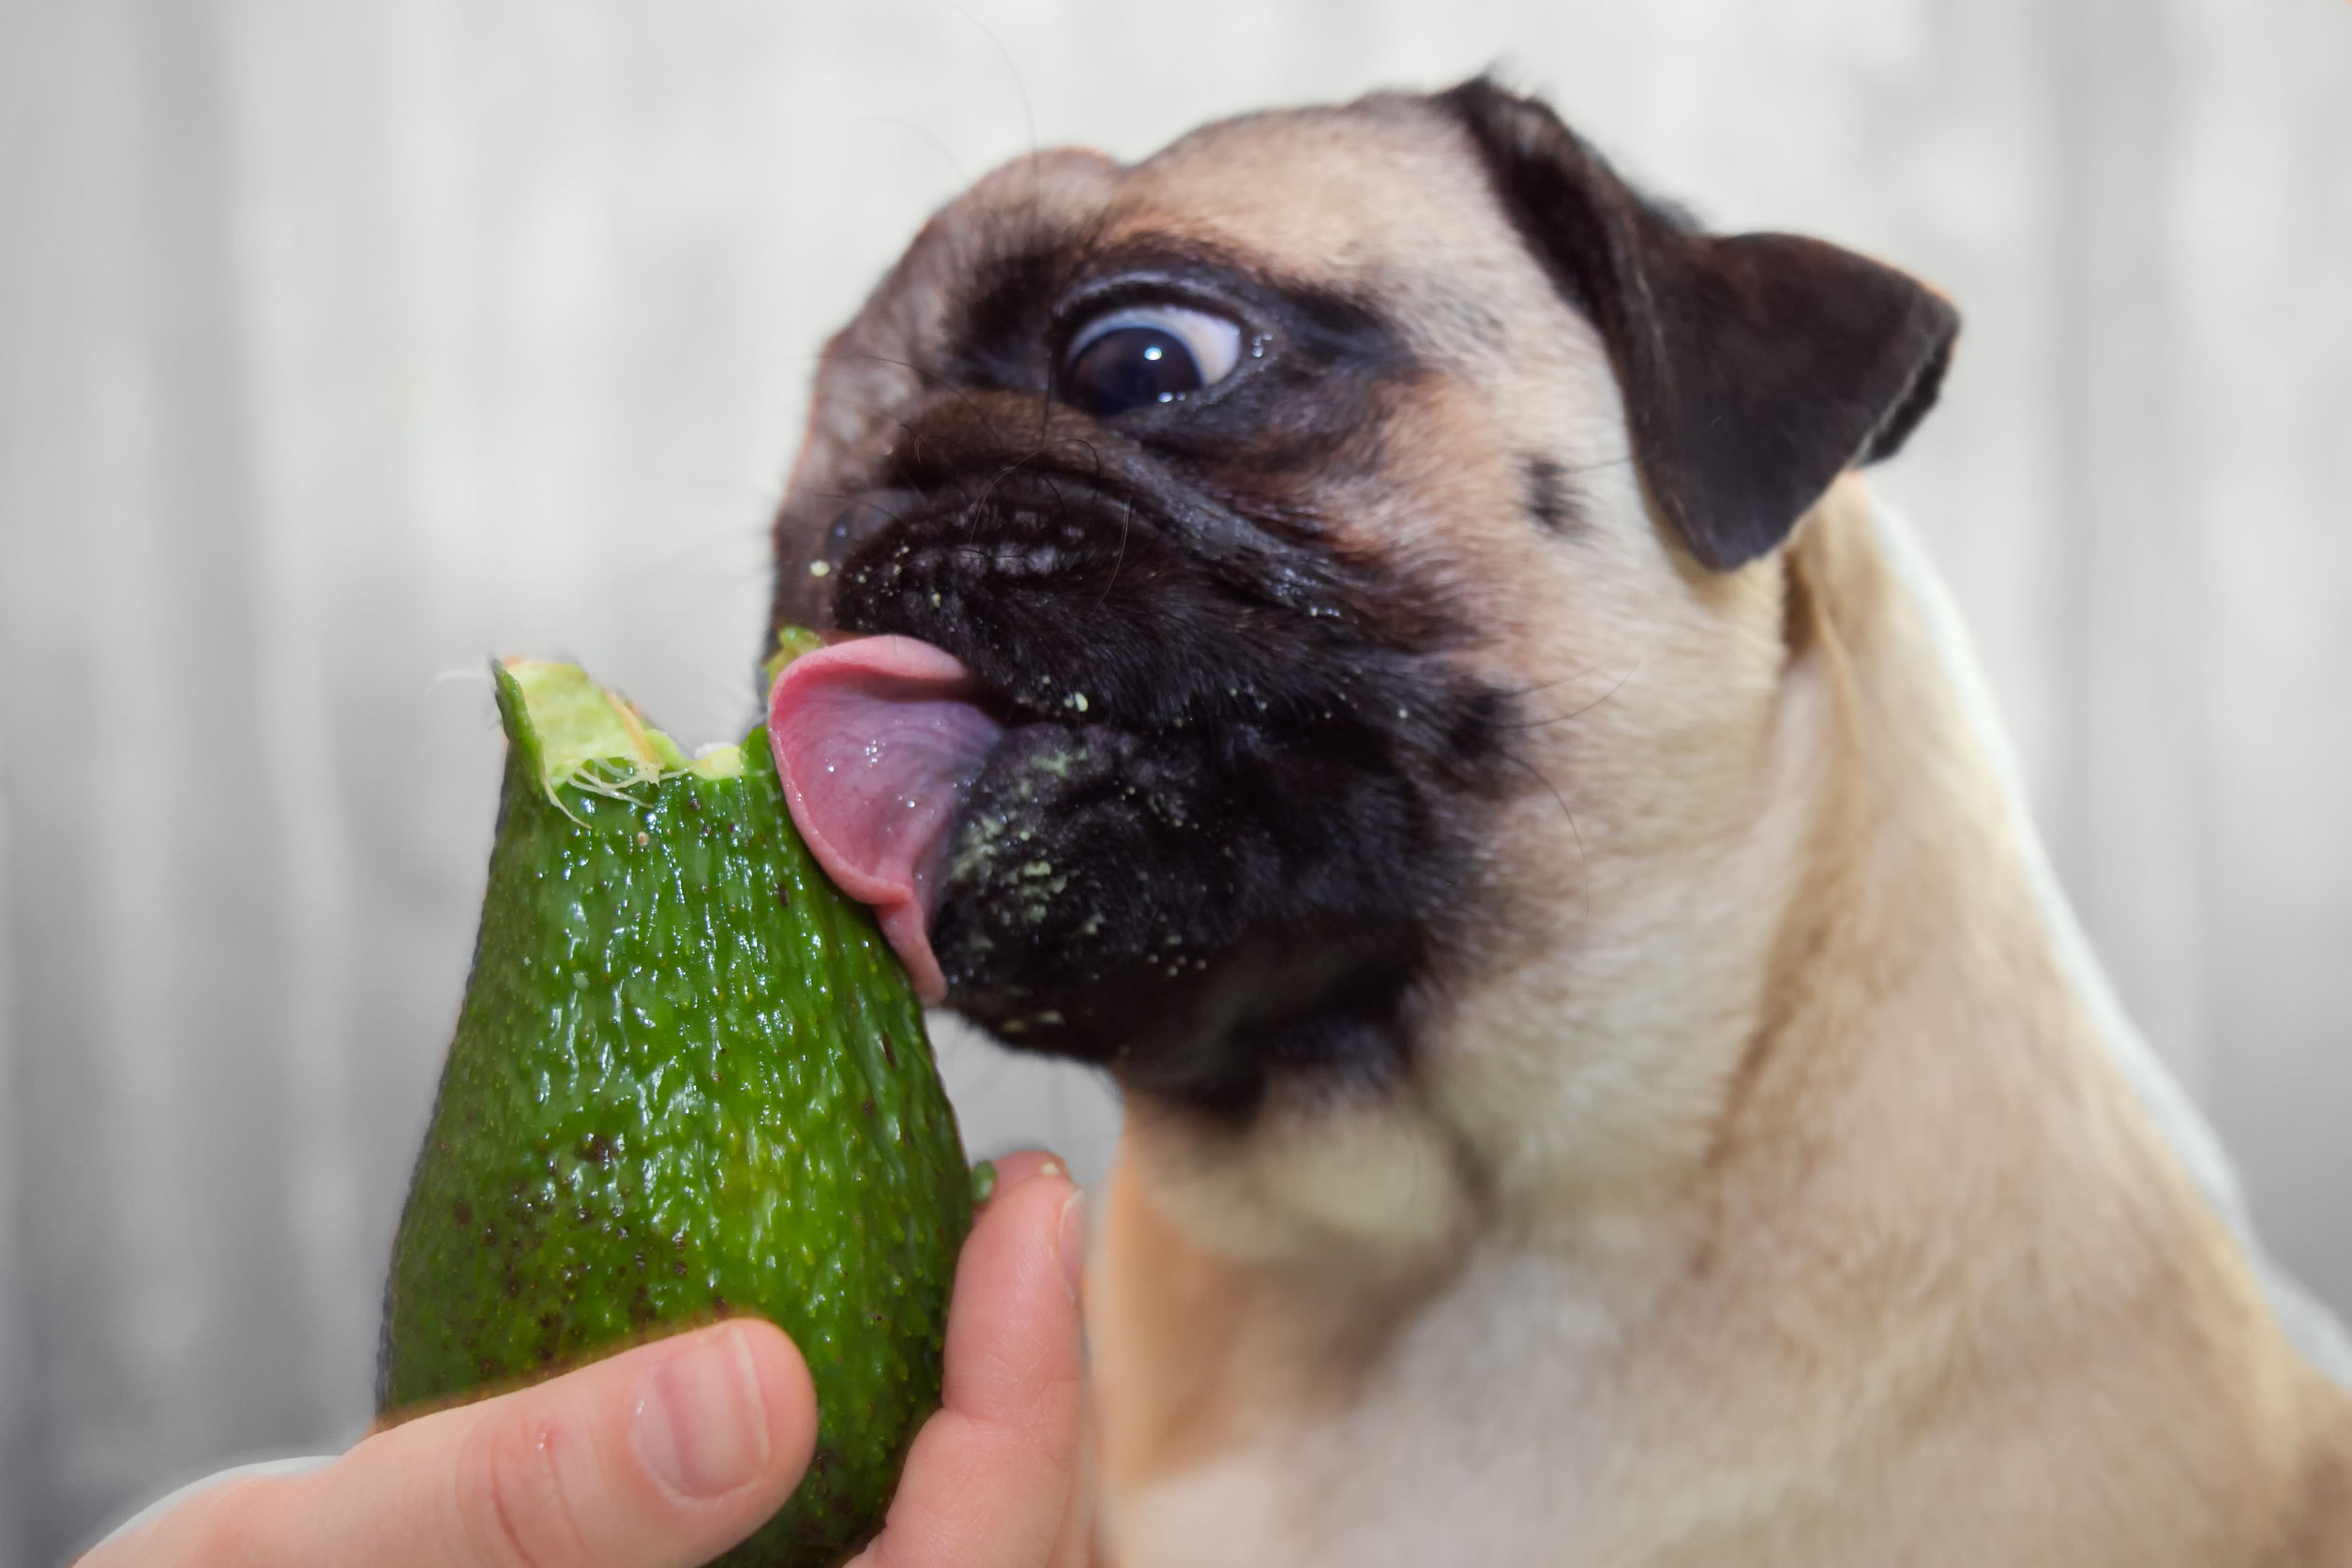 dogs shouldn't eat avocados